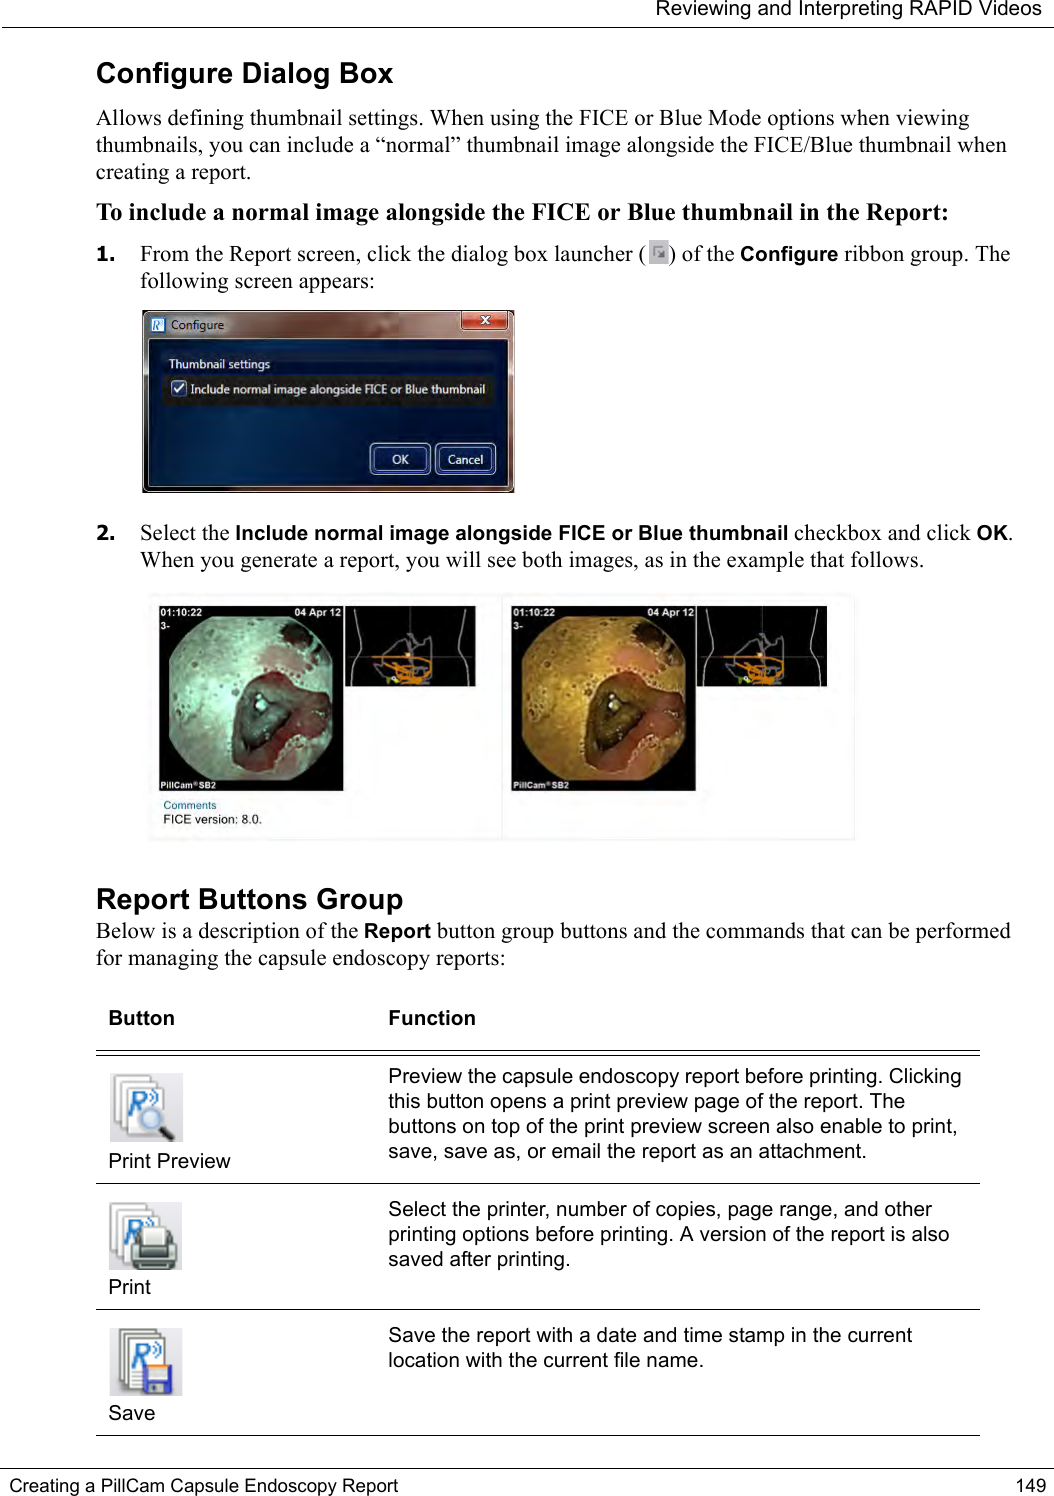 Reviewing and Interpreting RAPID VideosCreating a PillCam Capsule Endoscopy Report 149Configure Dialog BoxAllows defining thumbnail settings. When using the FICE or Blue Mode options when viewing thumbnails, you can include a “normal” thumbnail image alongside the FICE/Blue thumbnail when creating a report. To include a normal image alongside the FICE or Blue thumbnail in the Report:1. From the Report screen, click the dialog box launcher ( ) of the Configure ribbon group. The following screen appears:2. Select the Include normal image alongside FICE or Blue thumbnail checkbox and click OK. When you generate a report, you will see both images, as in the example that follows.Report Buttons GroupBelow is a description of the Report button group buttons and the commands that can be performed for managing the capsule endoscopy reports: Button FunctionPrint PreviewPreview the capsule endoscopy report before printing. Clicking this button opens a print preview page of the report. The buttons on top of the print preview screen also enable to print, save, save as, or email the report as an attachment. PrintSelect the printer, number of copies, page range, and other printing options before printing. A version of the report is also saved after printing.SaveSave the report with a date and time stamp in the current location with the current file name.